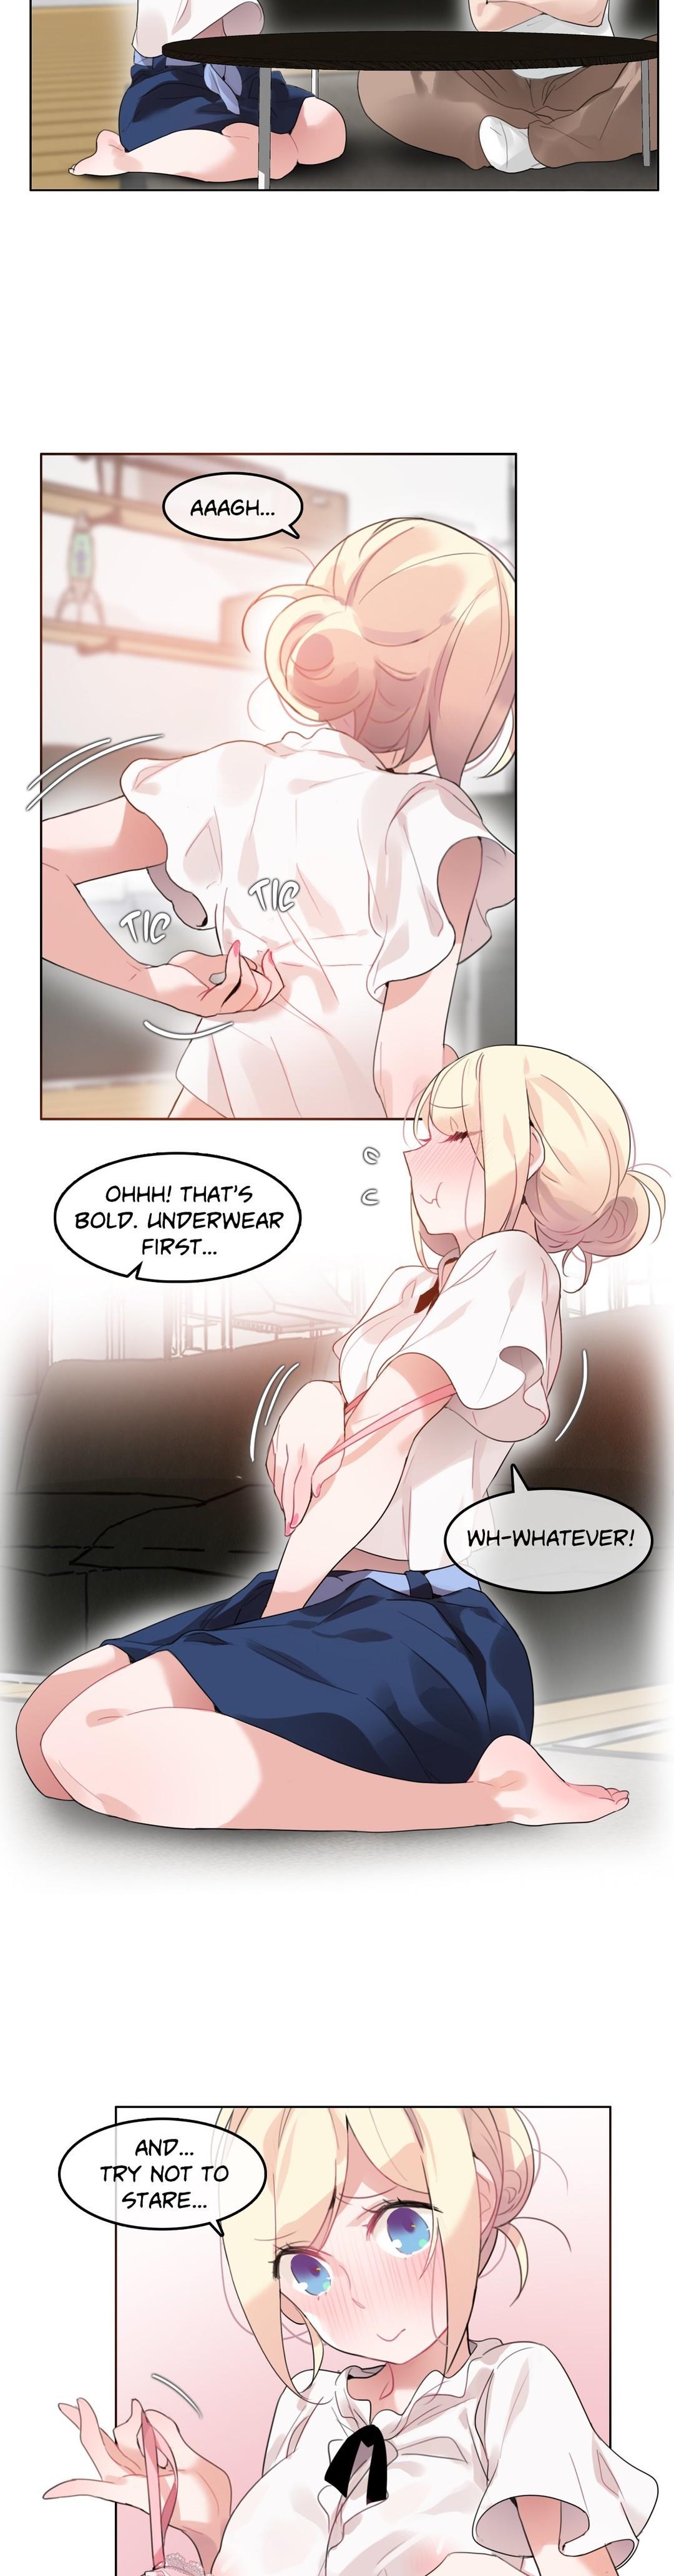 A Pervert's Daily Life Ch. 1-34 758